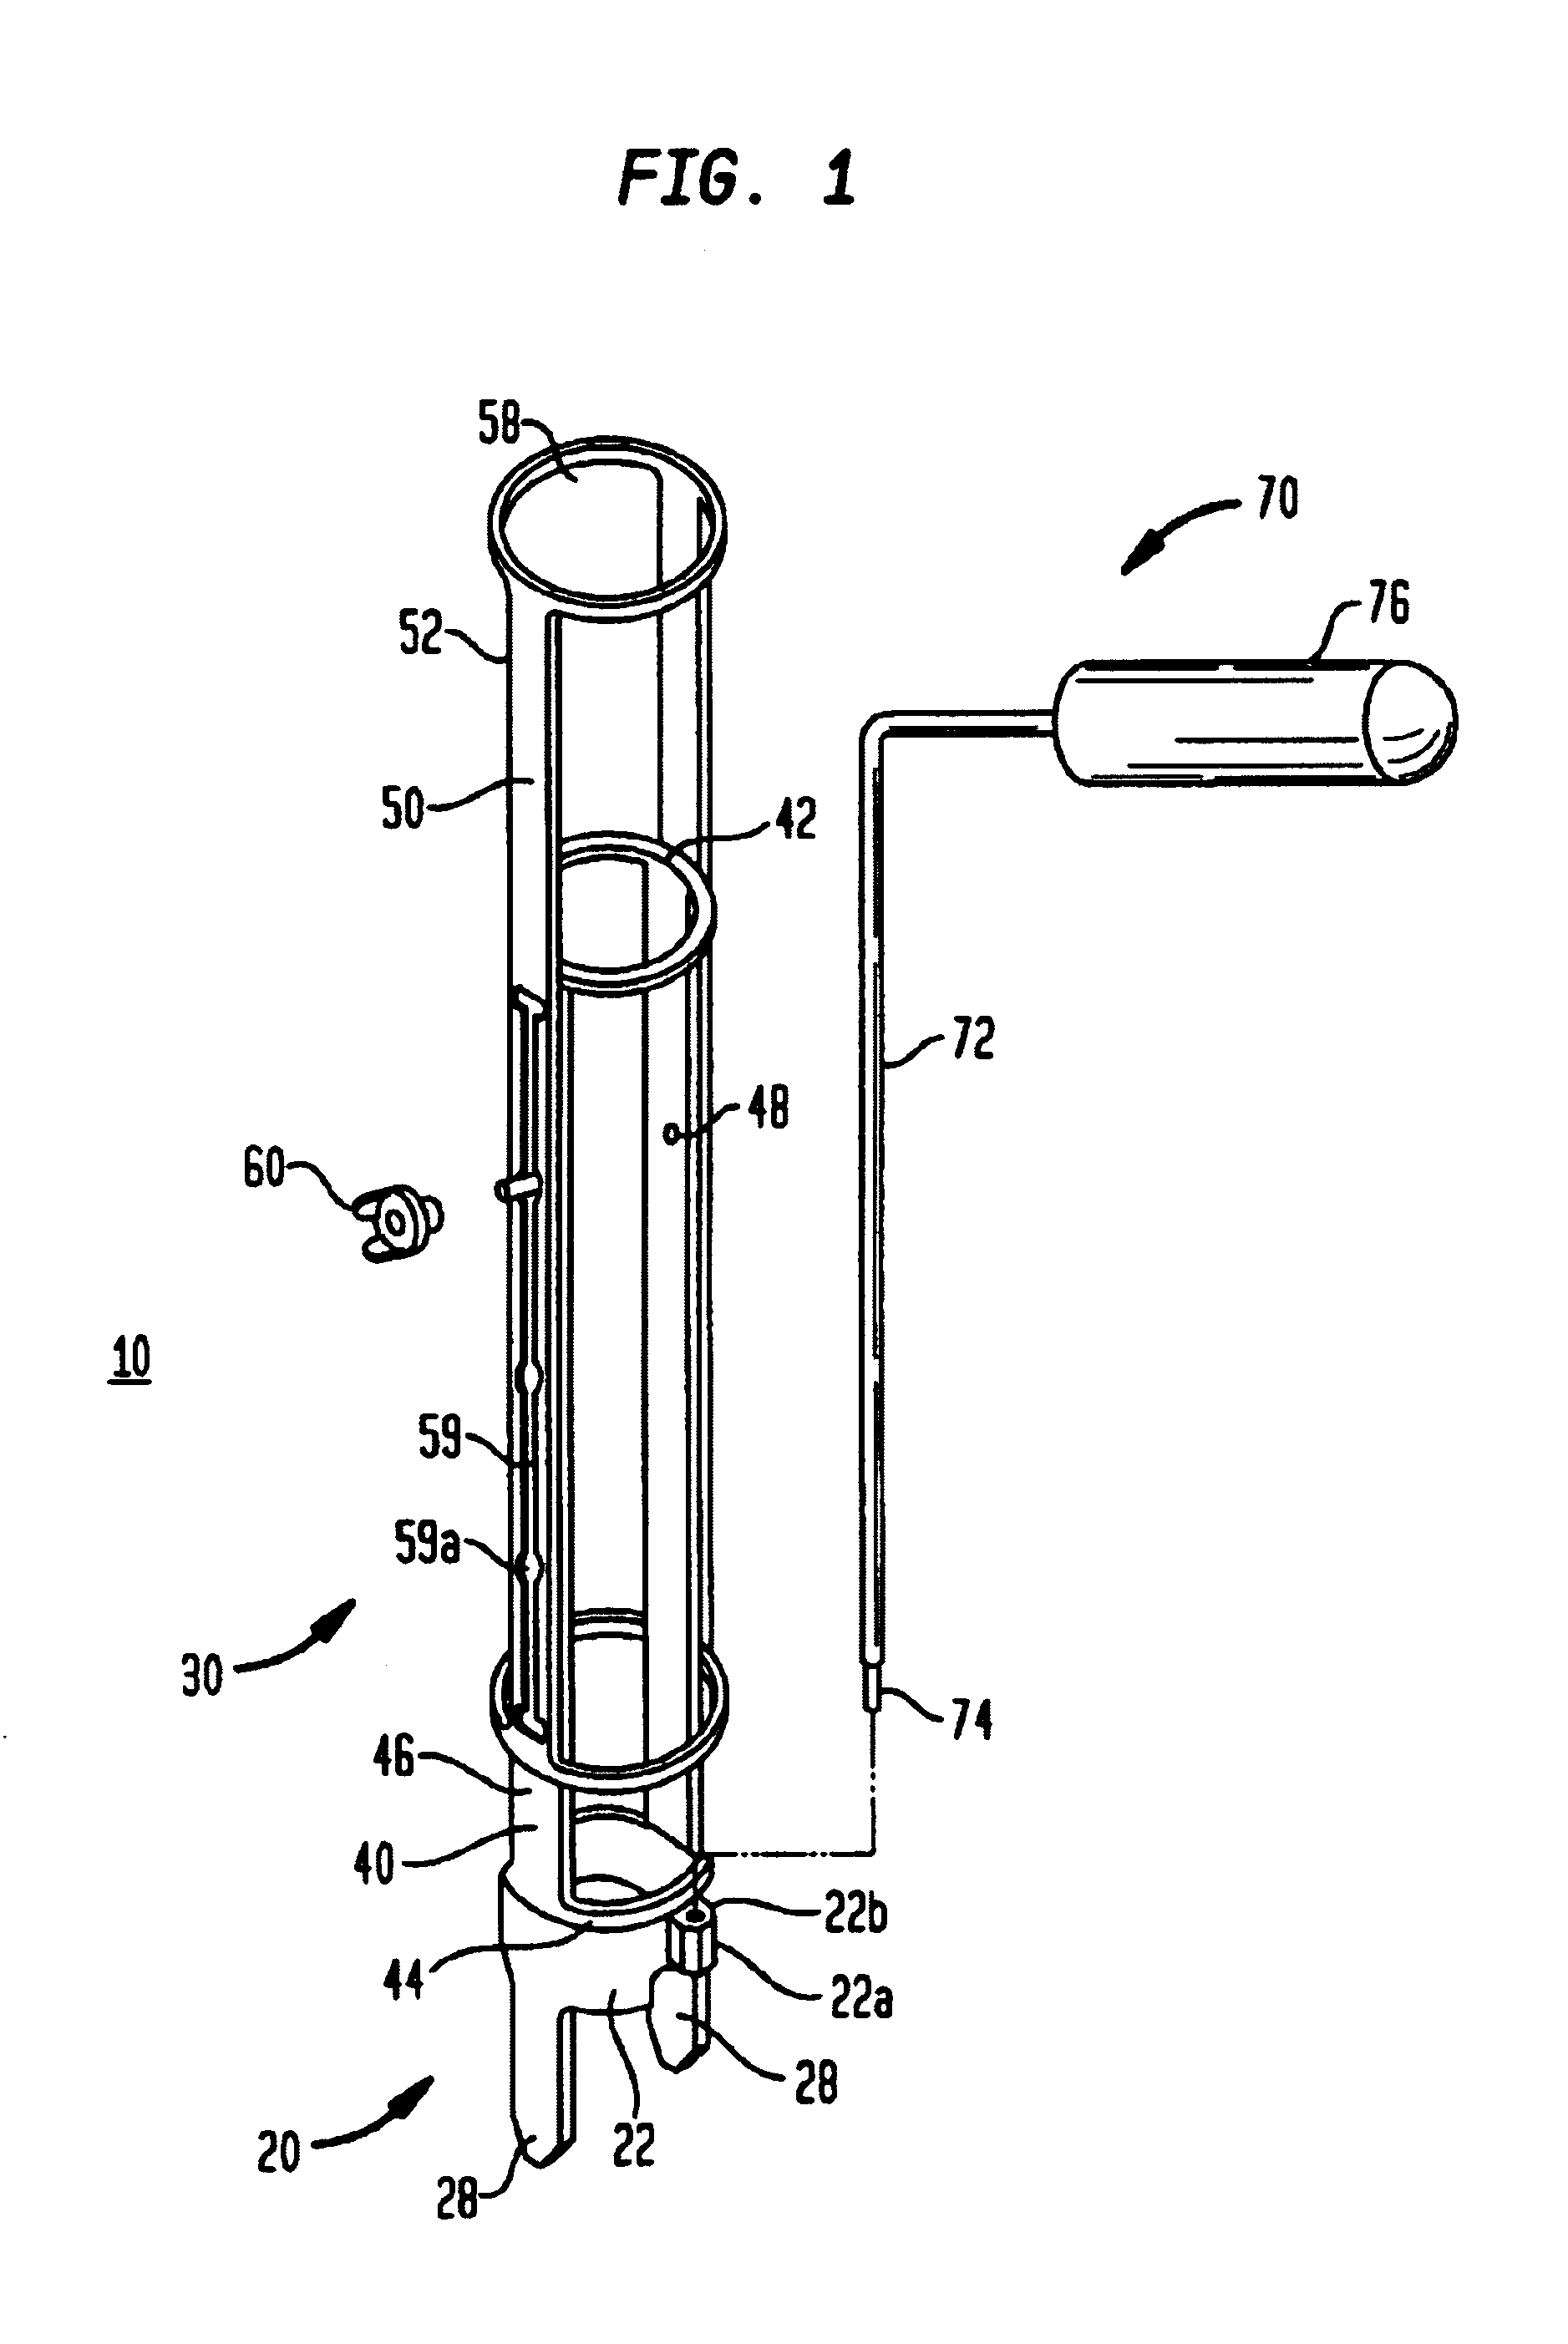 Instrumentation and method for implant insertion